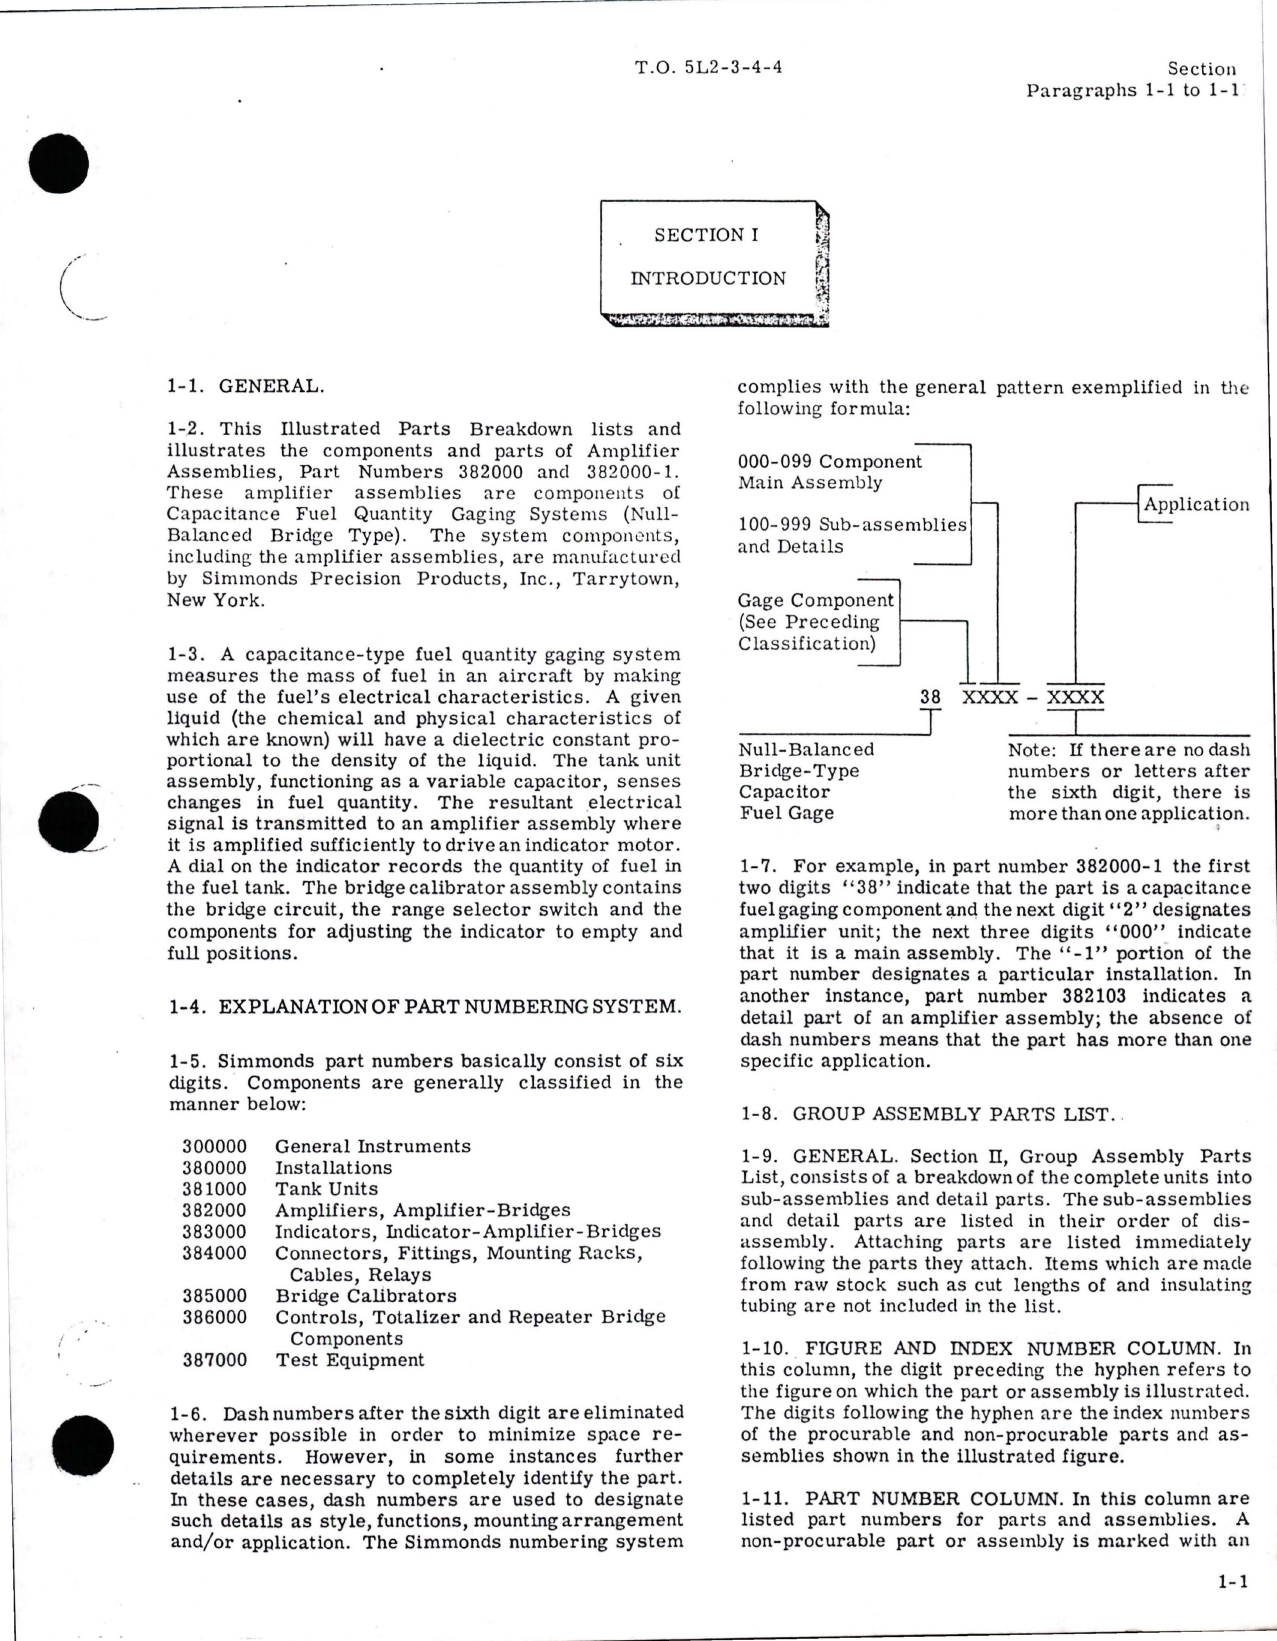 Sample page 5 from AirCorps Library document: Illustrated Parts Breakdown for Capacitor Fuel Gage System Amplifier Assemblies - Parts 382000 and 382000-1